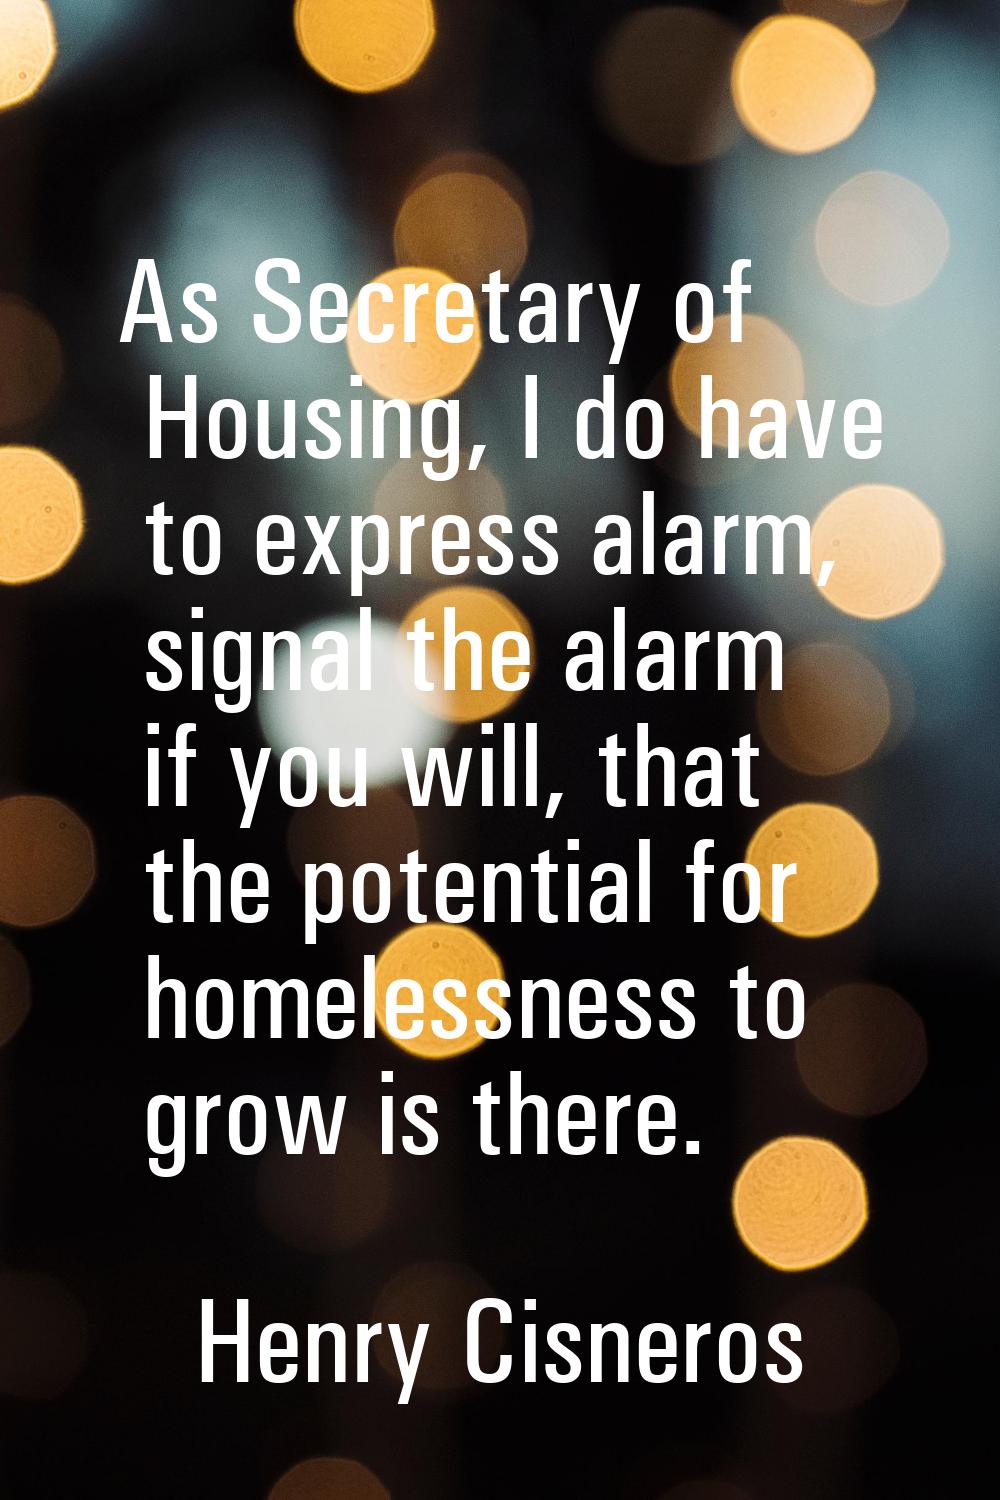 As Secretary of Housing, I do have to express alarm, signal the alarm if you will, that the potenti